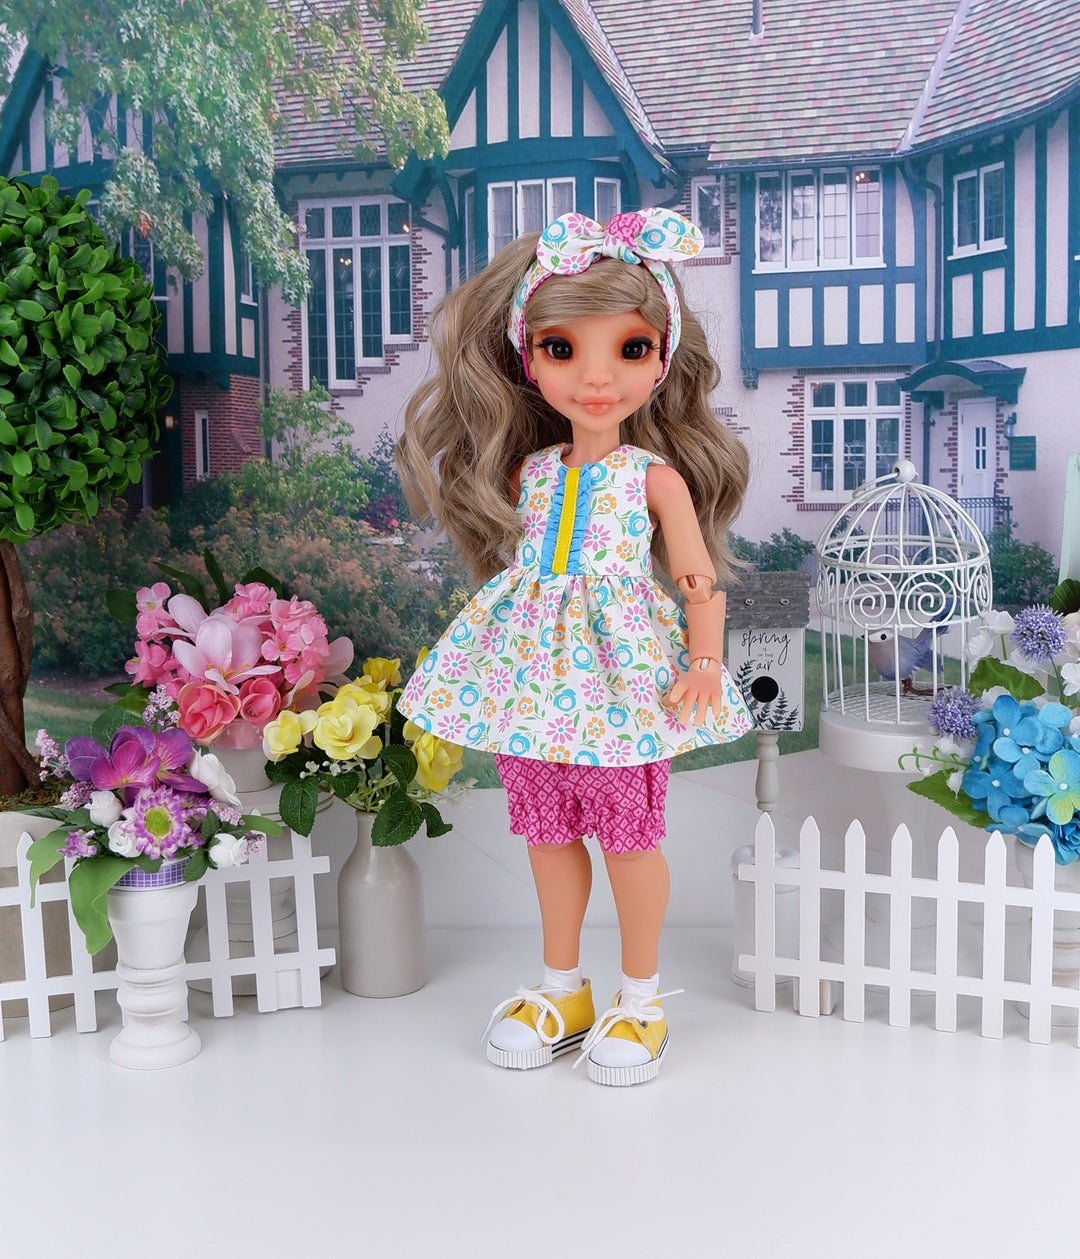 Sunshine Flowers - top & bloomers with shoes for Ava doll BJD